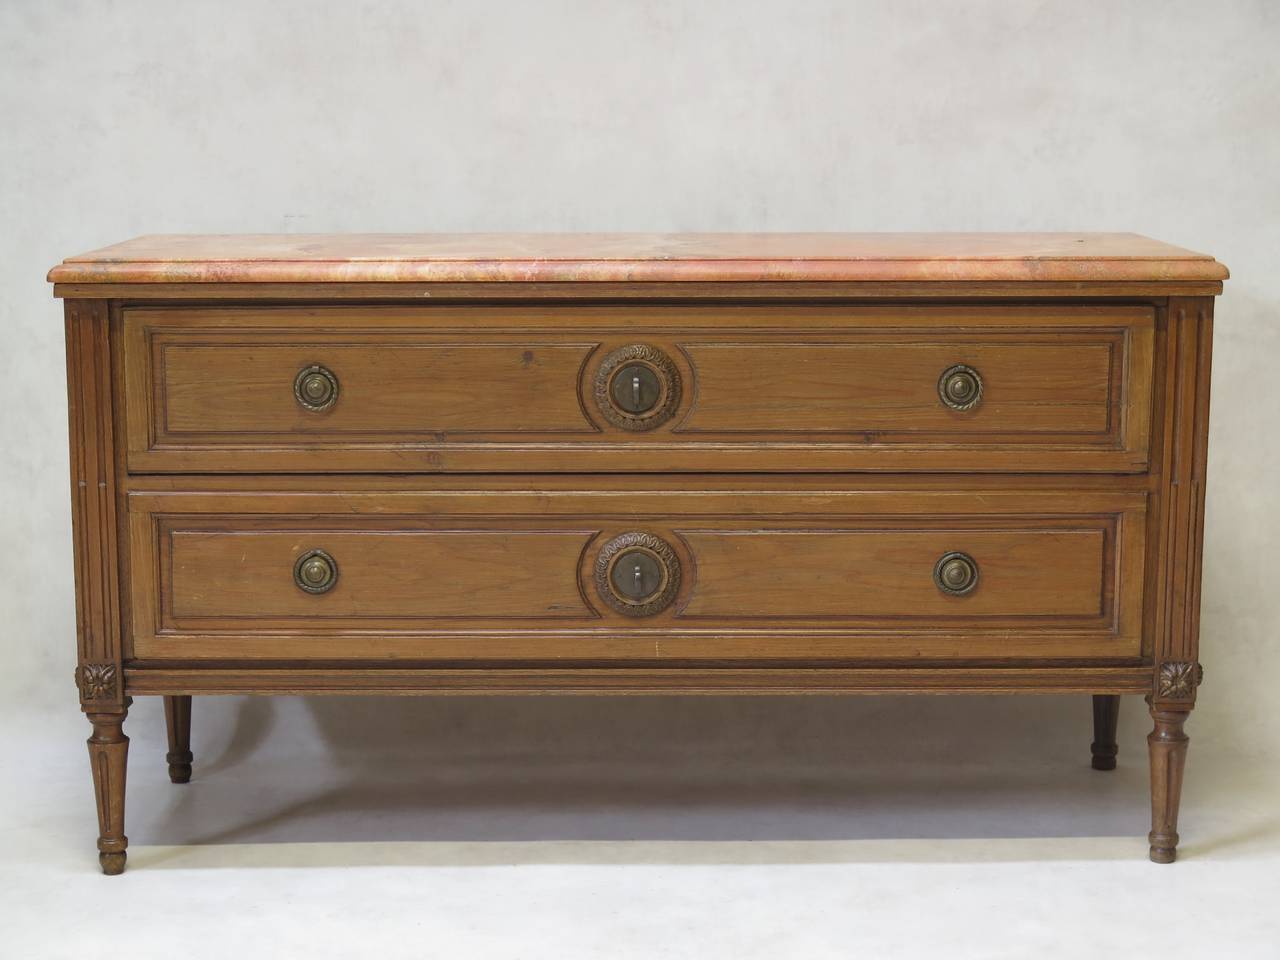 Charming Louis XVI style two-drawer commode in natural waxed pine wood, with a pink travertine top. Raised on tapering and fluted legs. Carved oval medallion detail on either side. The long drawers were originally destined to hold trousers hence the